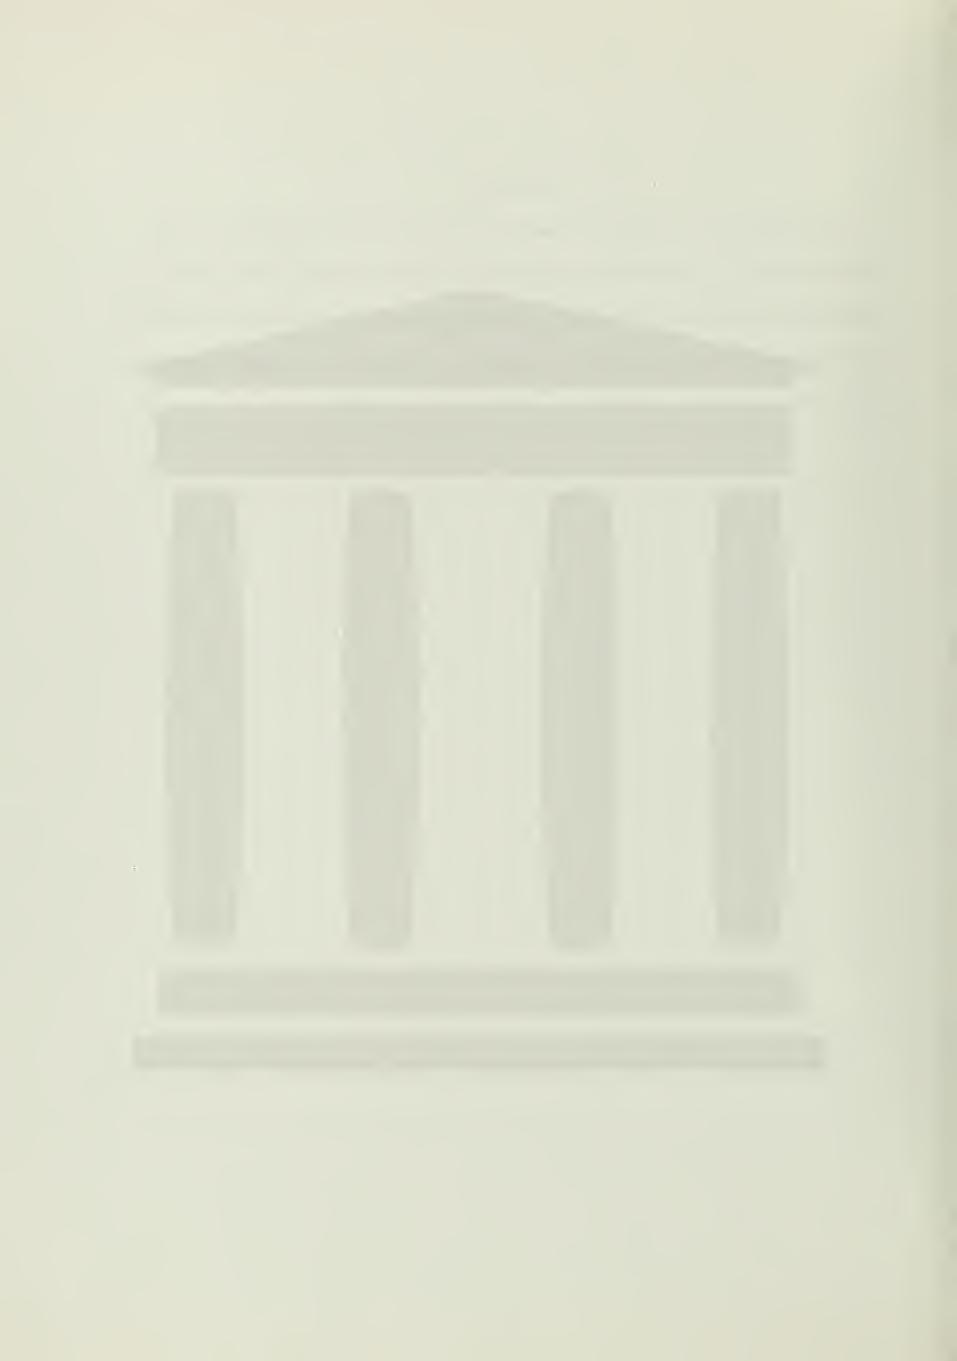 Digitized by the Internet Archive in